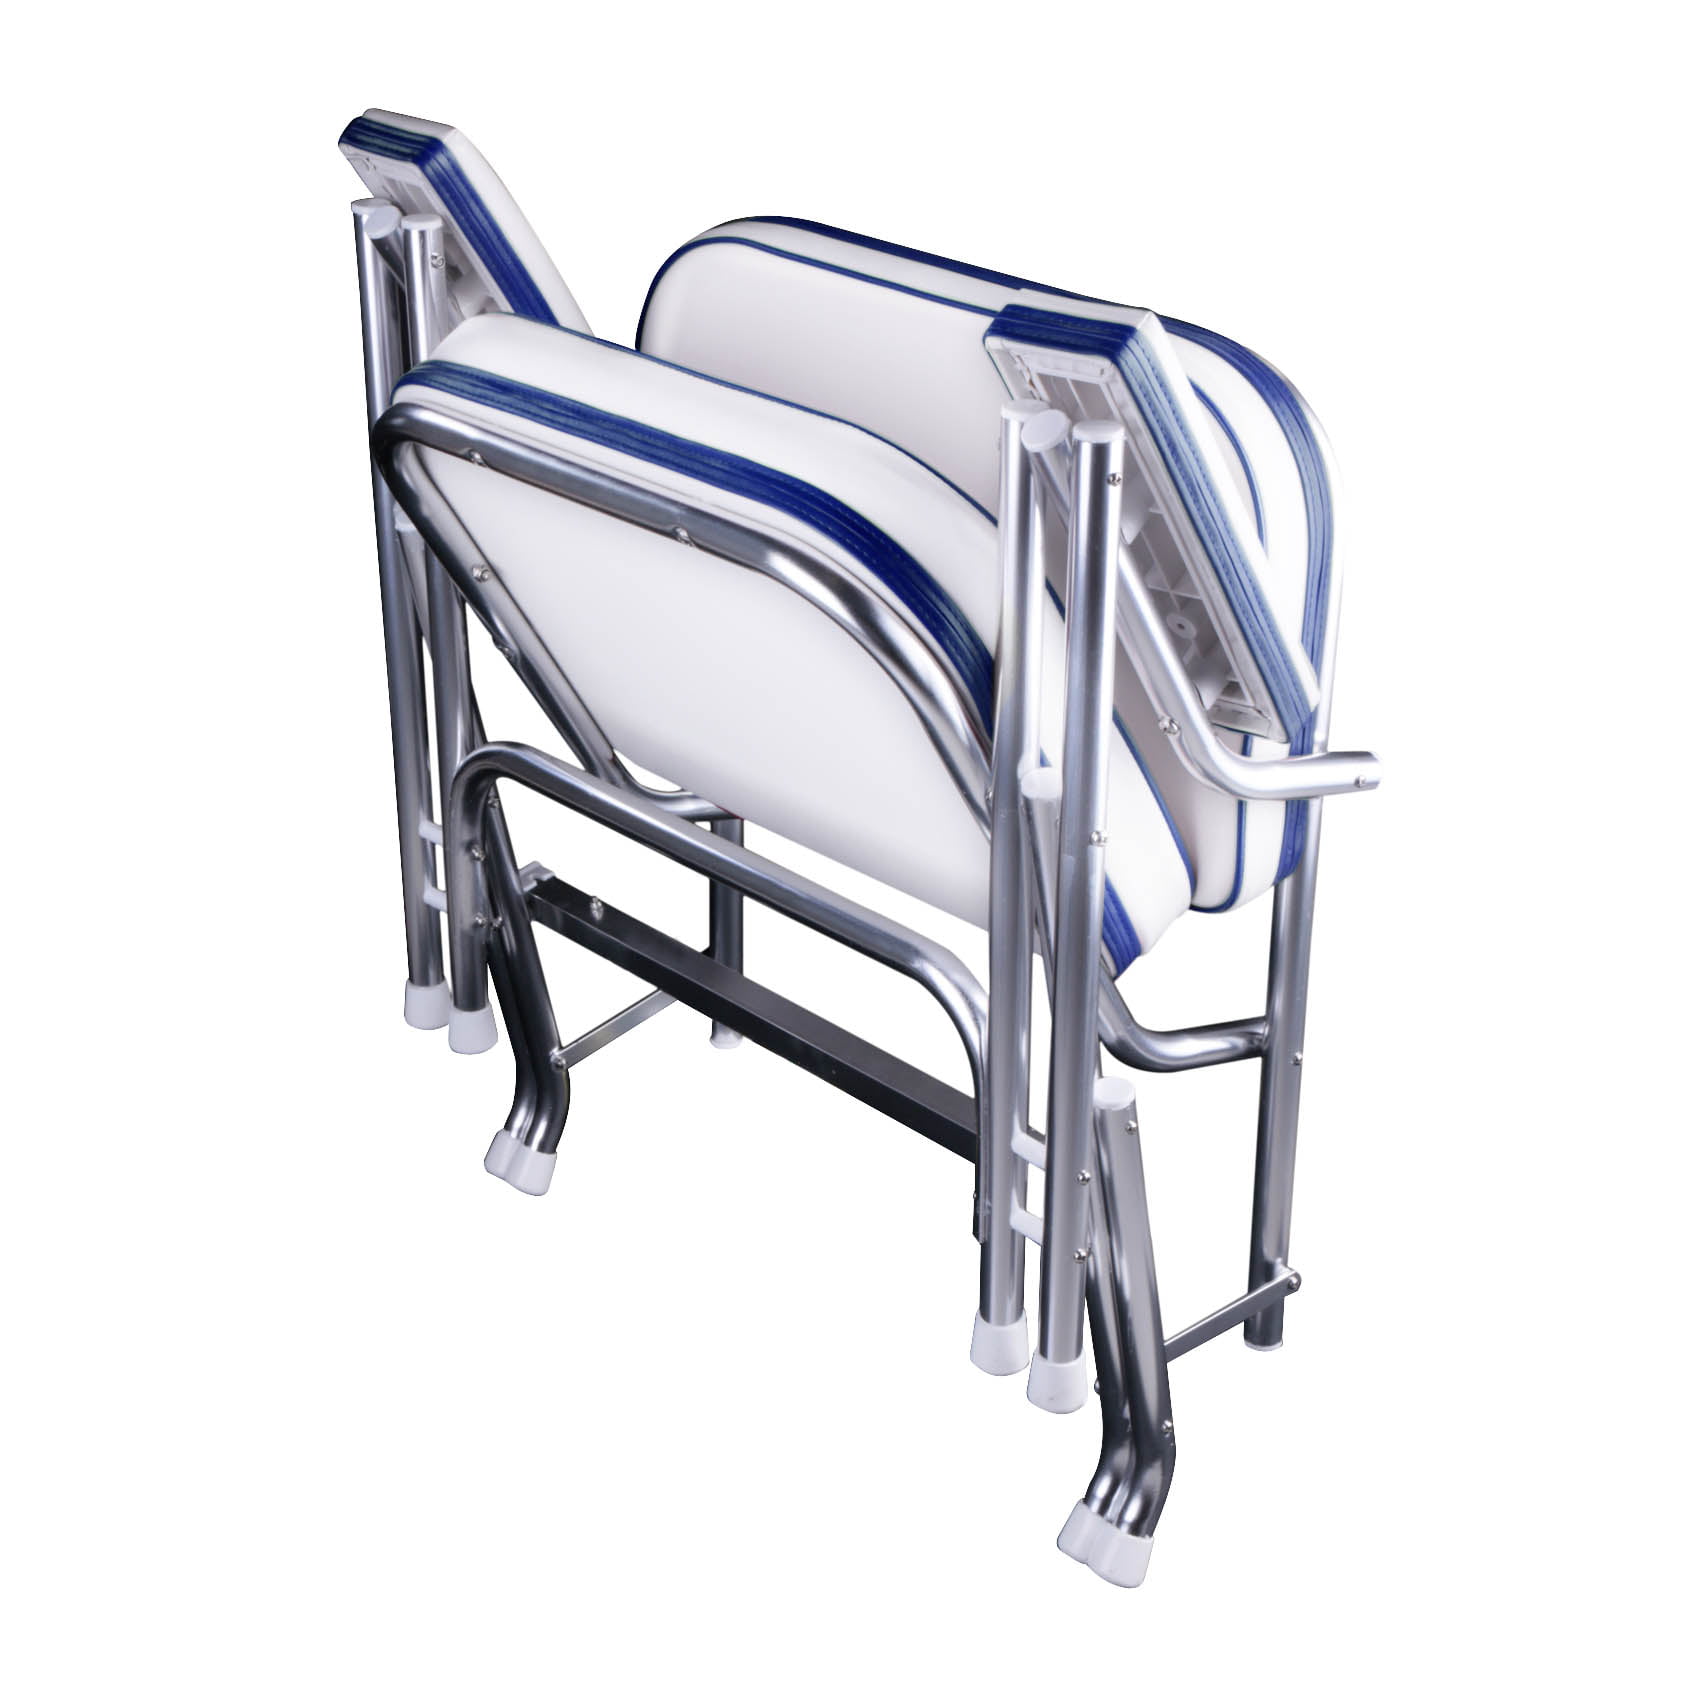 Leader Accessories Folding Deck Chair with Aluminum frame, armrests,Portable 